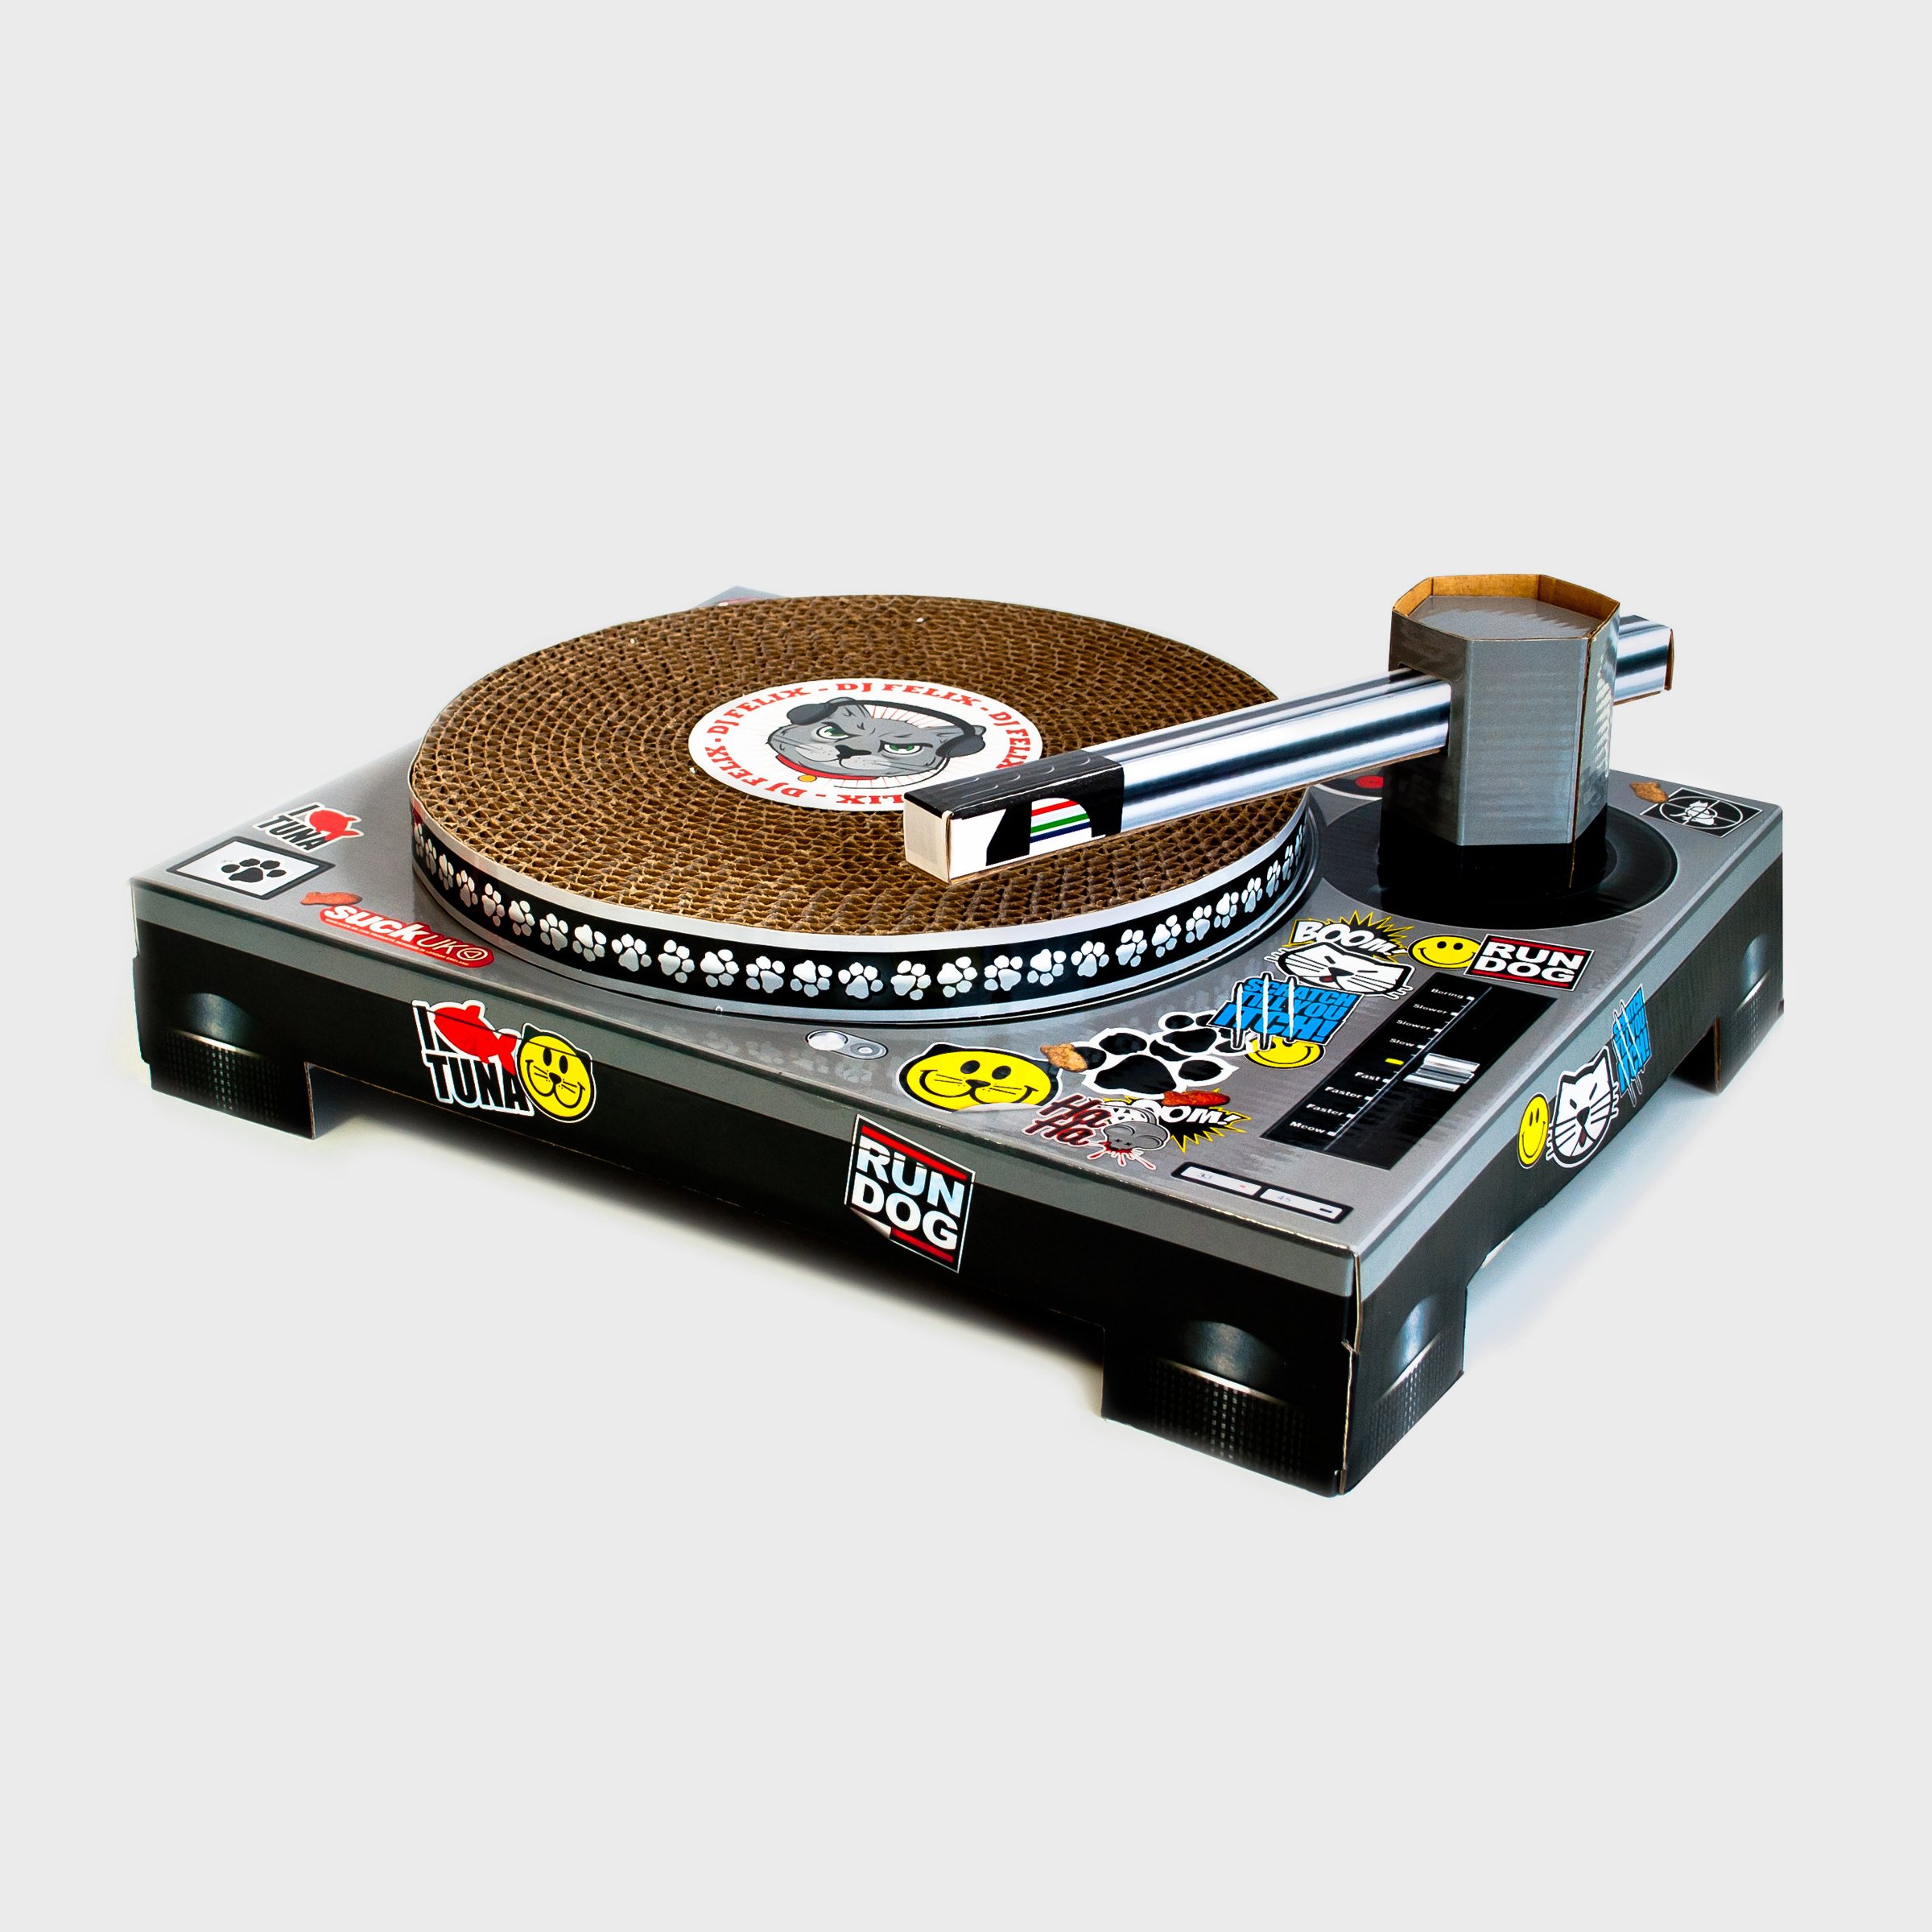 A turntable designed for cool cats